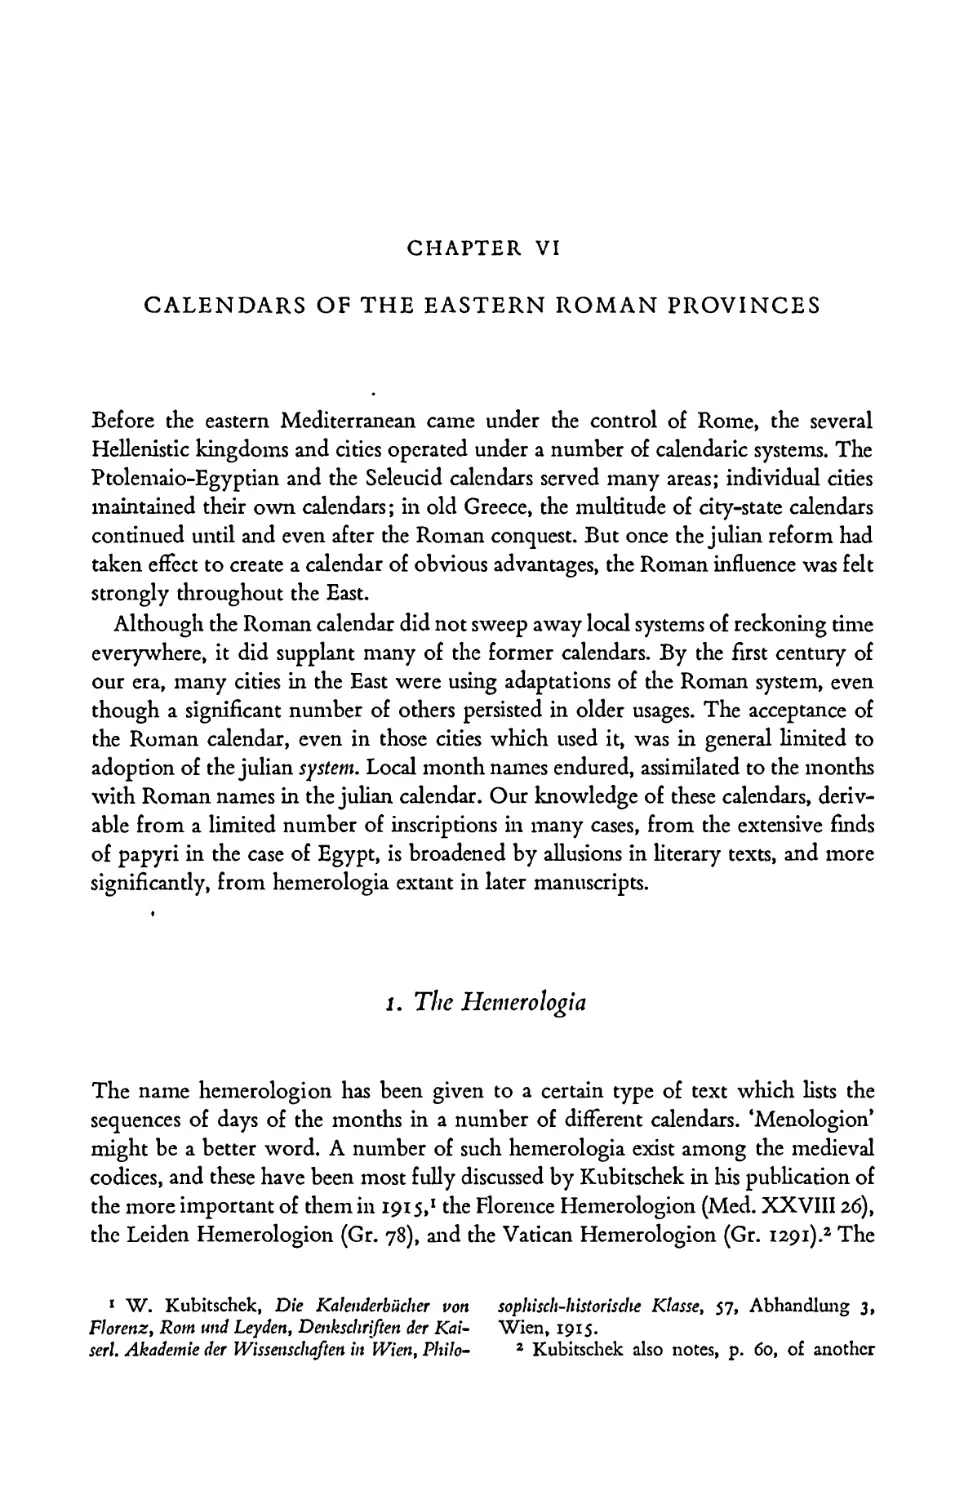 CHAPTER VI. CALENDARS OF THE EASTERN ROMAN PROVINCES